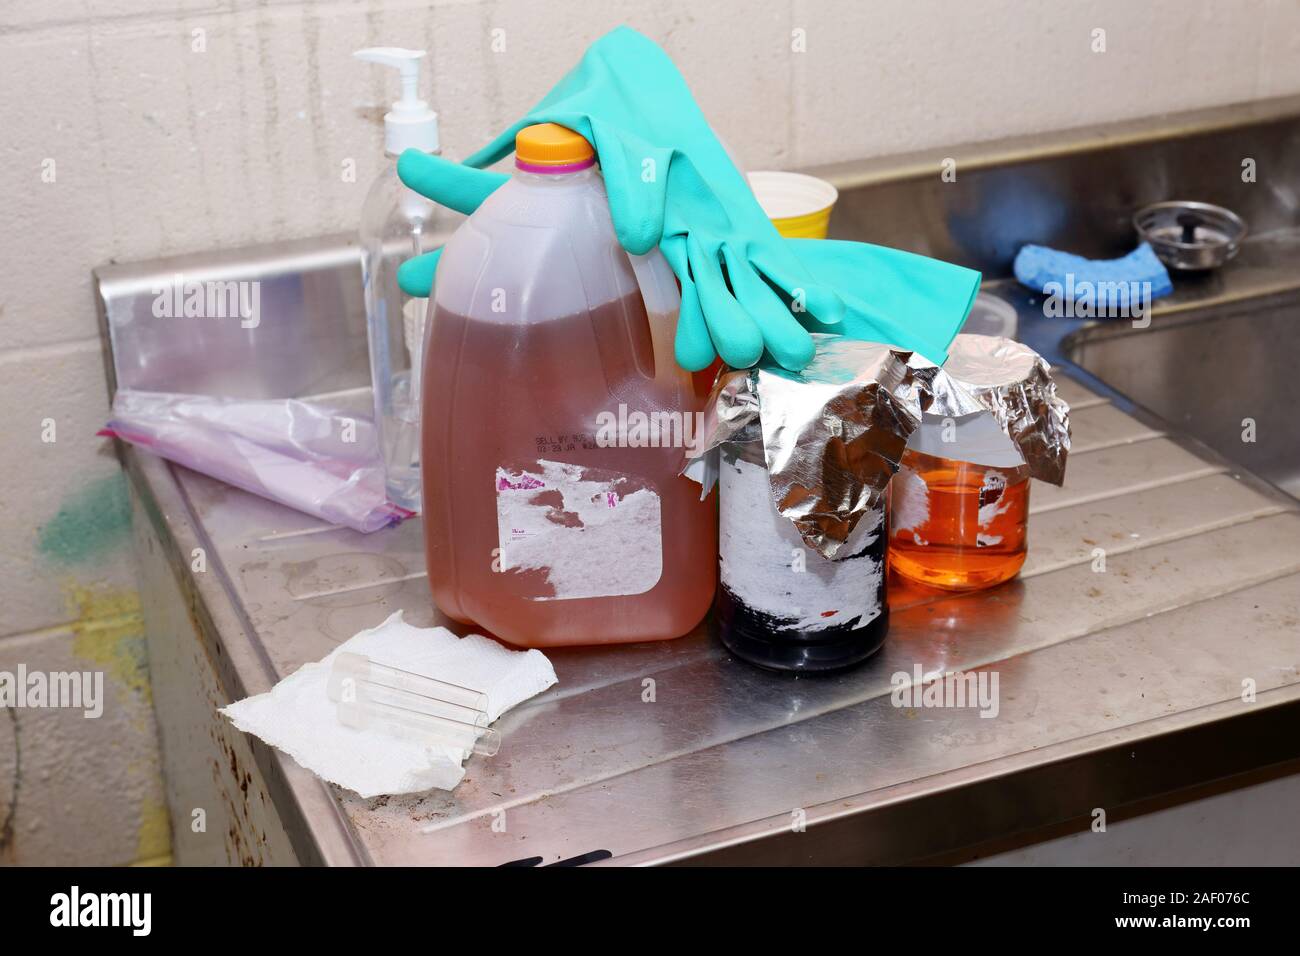 Unlabeled chemicals with gloves resting on top on a steel counter top next to a sink Stock Photo